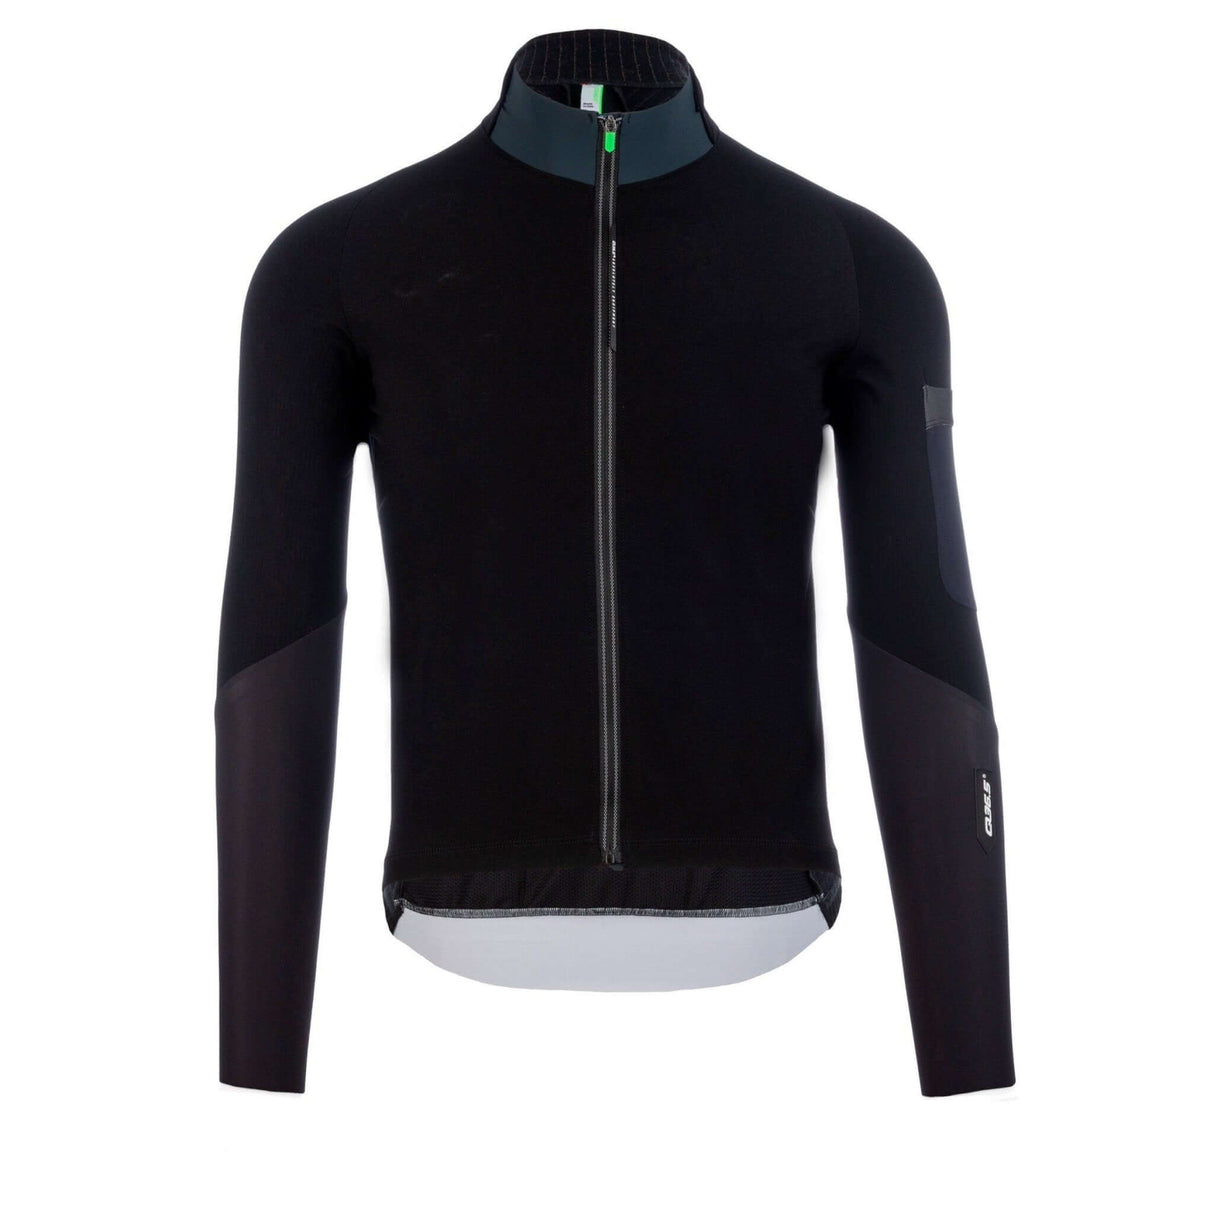 Q36.5 Hybrid Que X Long Sleeve Cycling Jersey | Strictly Bicycles